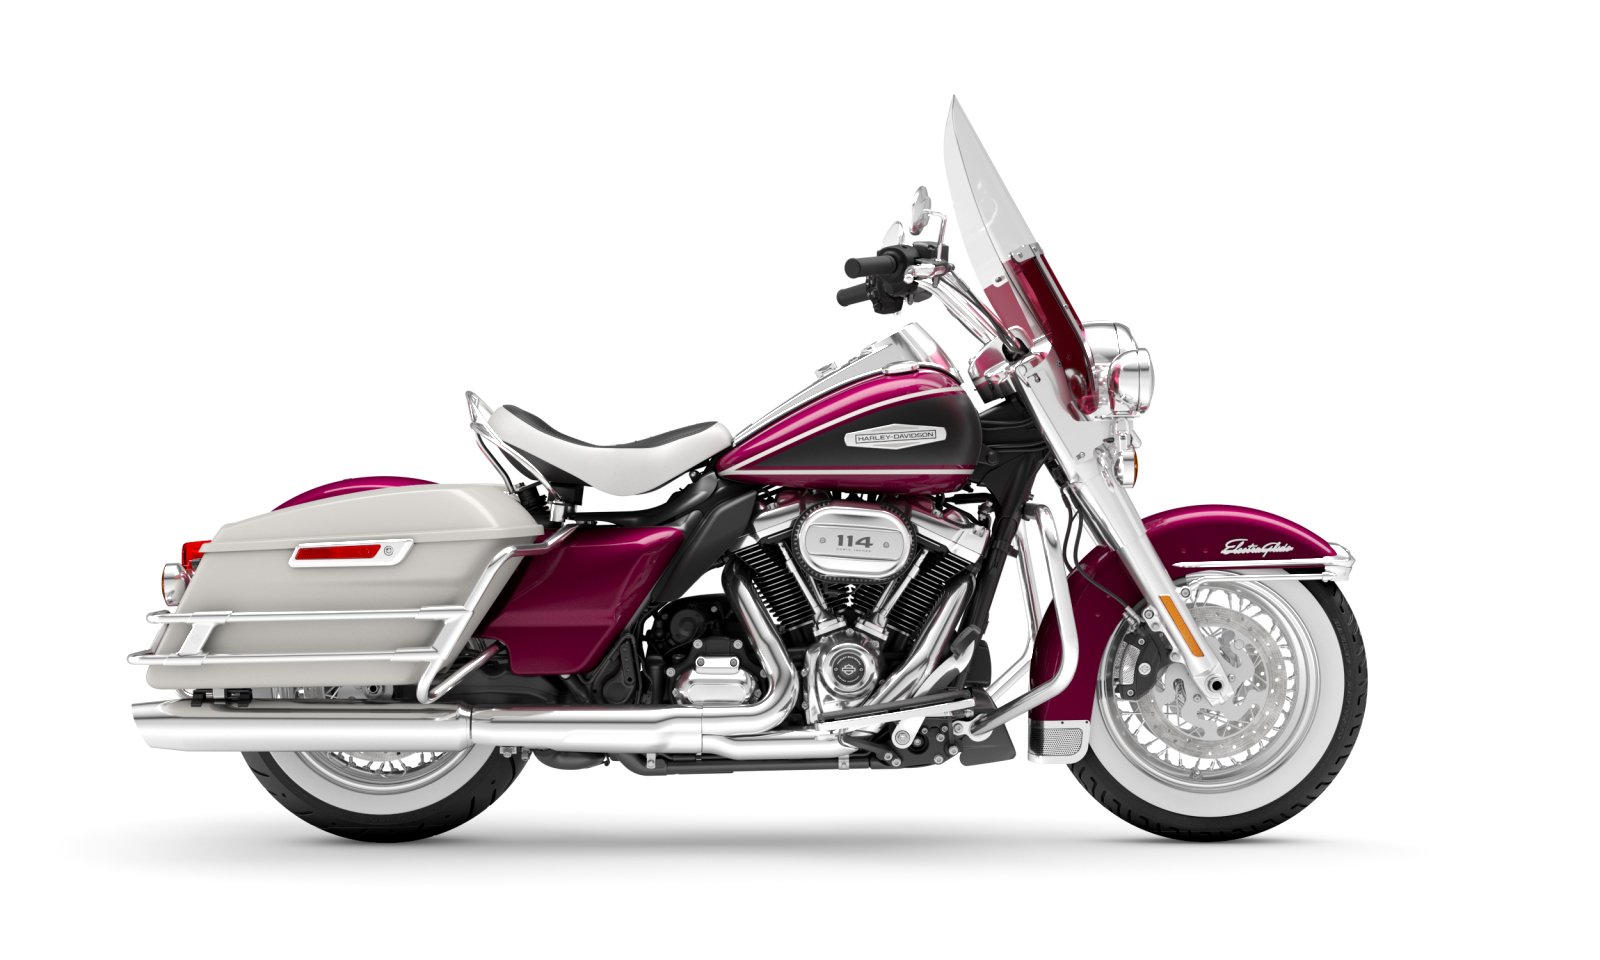 https://www.harley-davidson.com/content/dam/h-d/images/product-images/bikes/motorcycle/2023/2023-electra-glide-highway-king/2023-electra-glide-highway-king-f98/360/2023-electra-glide-highway-king-f98-motorcycle-01.jpg?impolicy=myresize&rw=1600